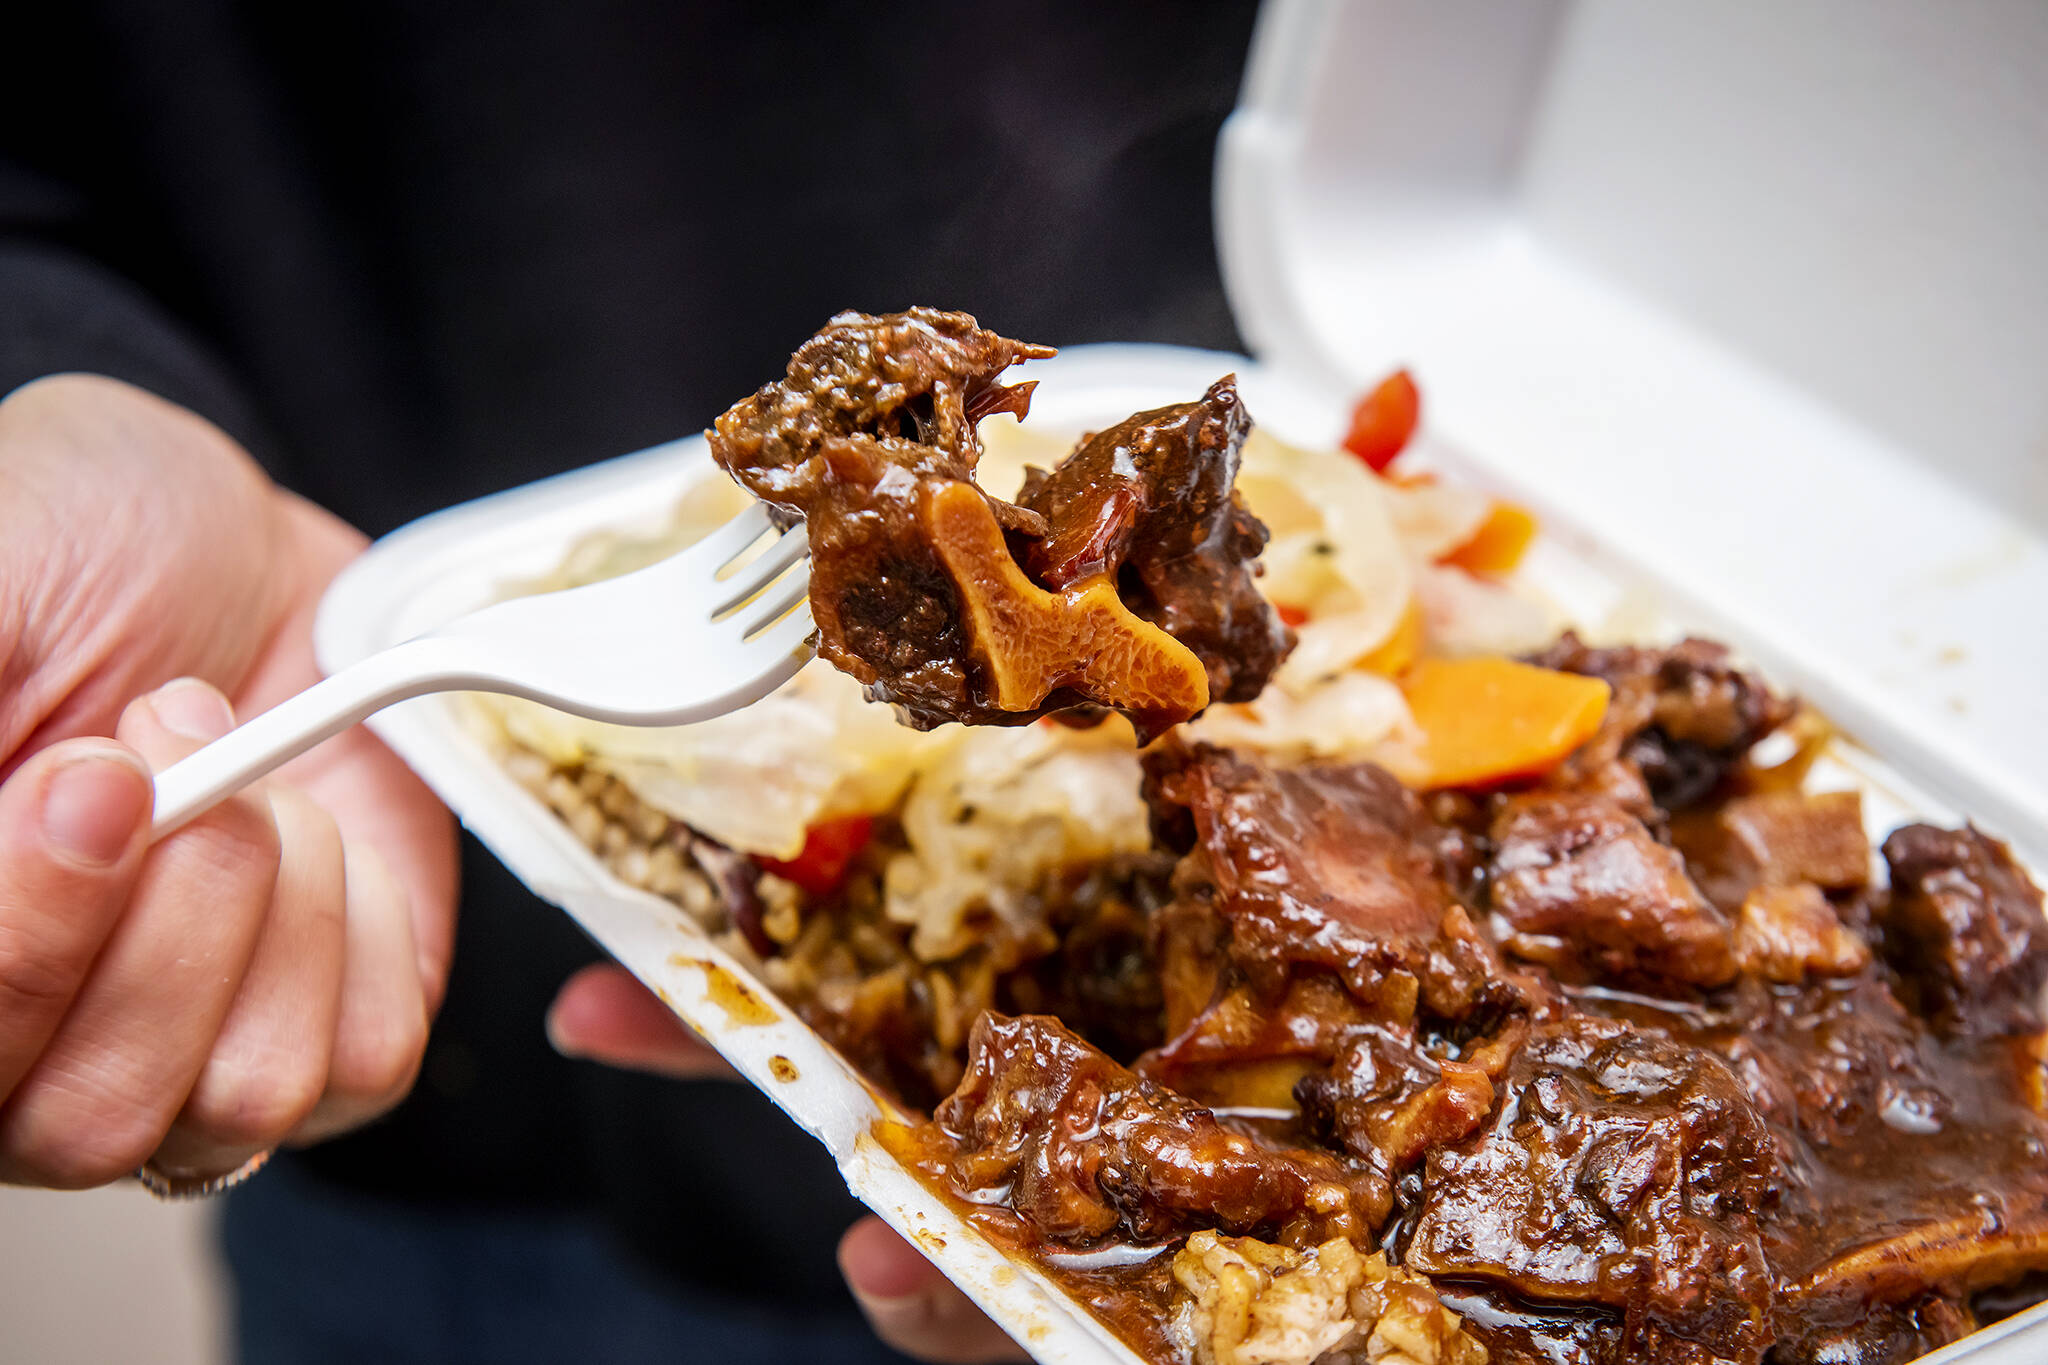 Toronto is getting a new Caribbean food festival